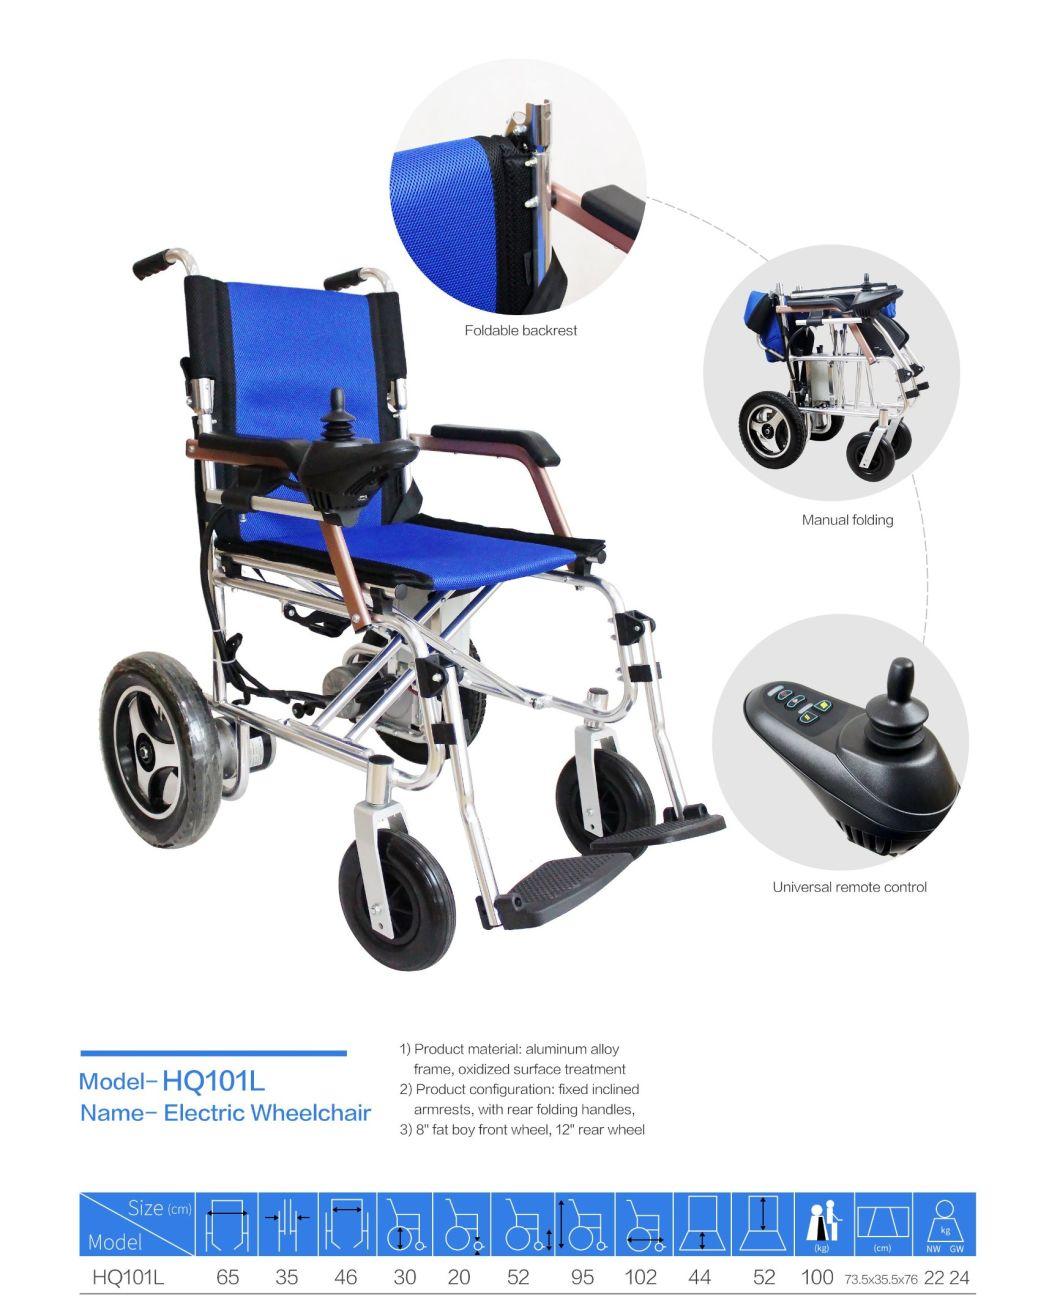 Electric Wheelchair Folding Lightweight Power Medical Mobility Aid Motorized FDA 1